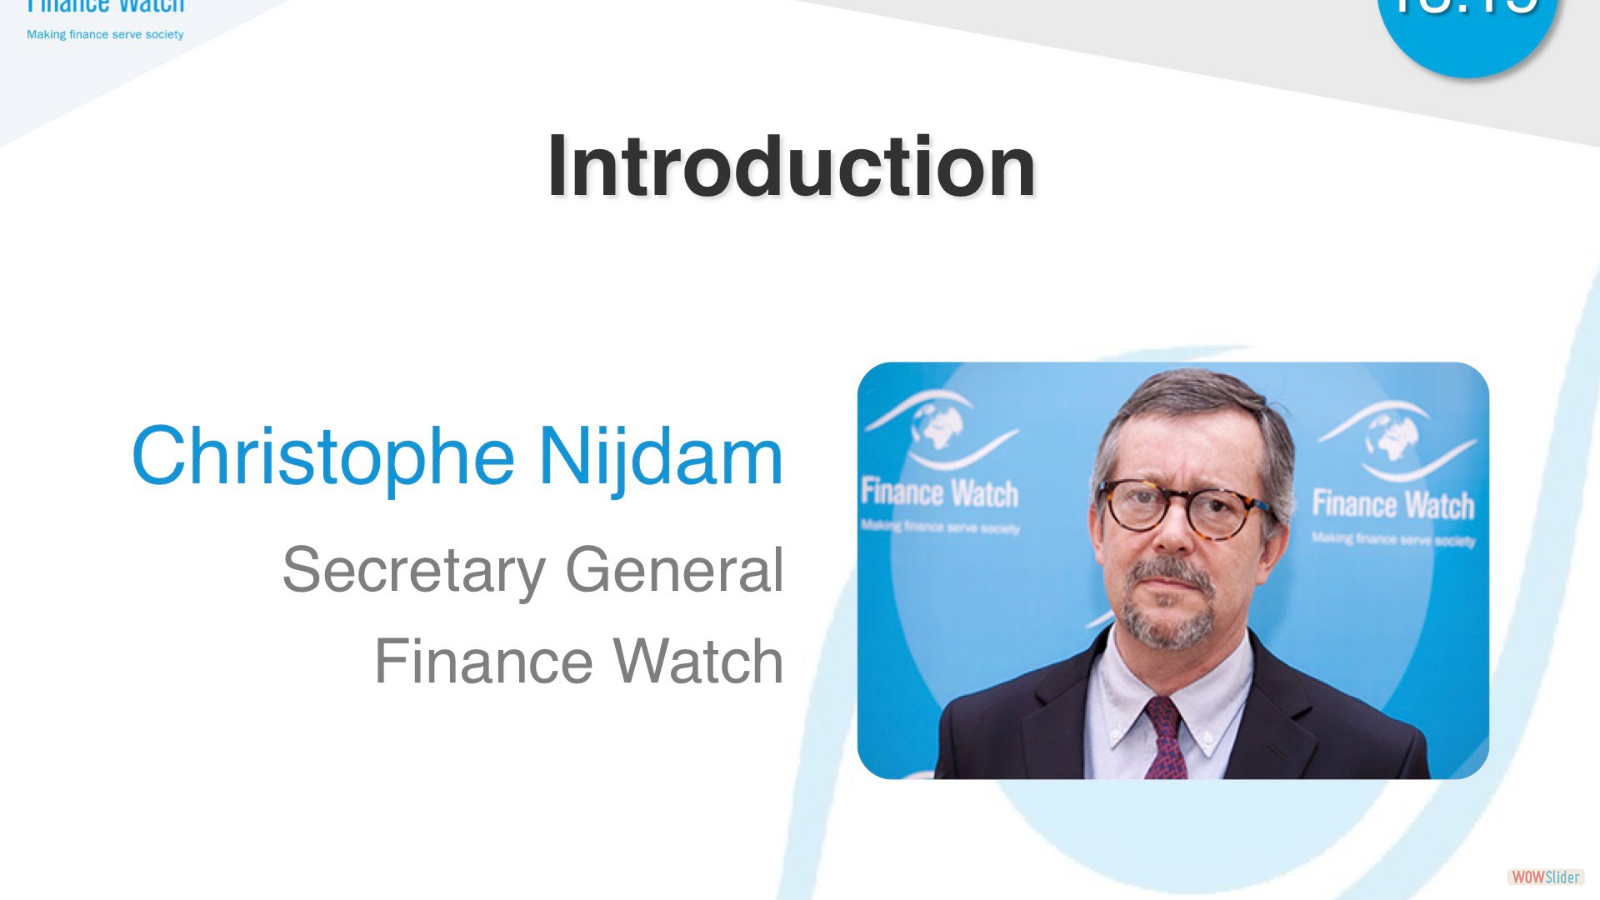 The future of traditional banking: Introduction from Christophe Nijdam, June 2016